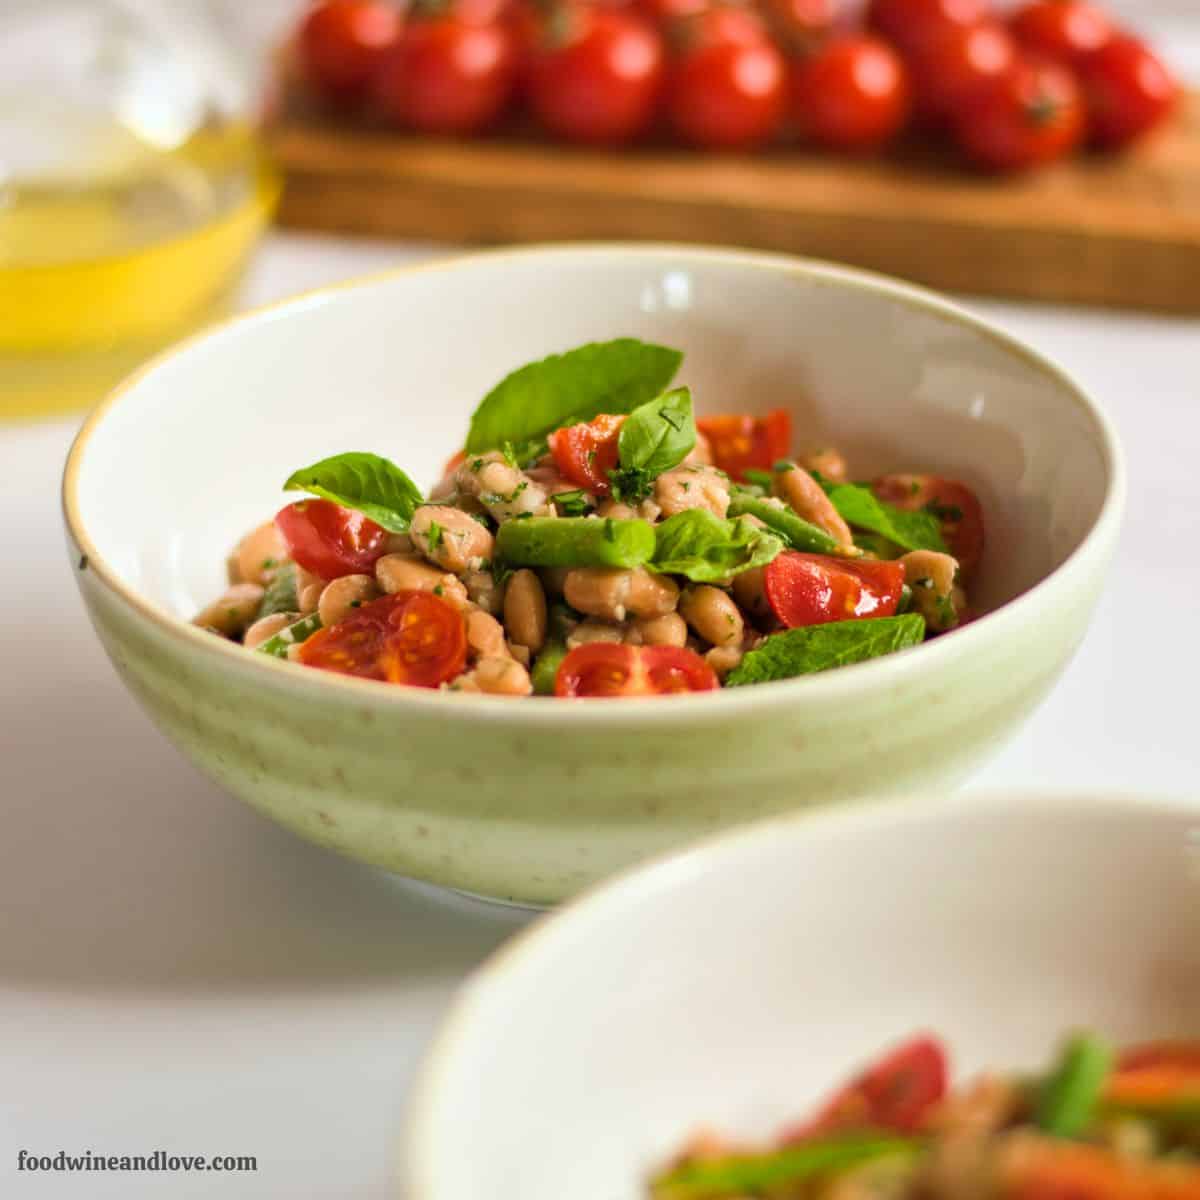 Green Bean and Tomato Salad, a delicious vegan and Mediterranean diet side or meal recipe tossed in a tasty lemon dressing.